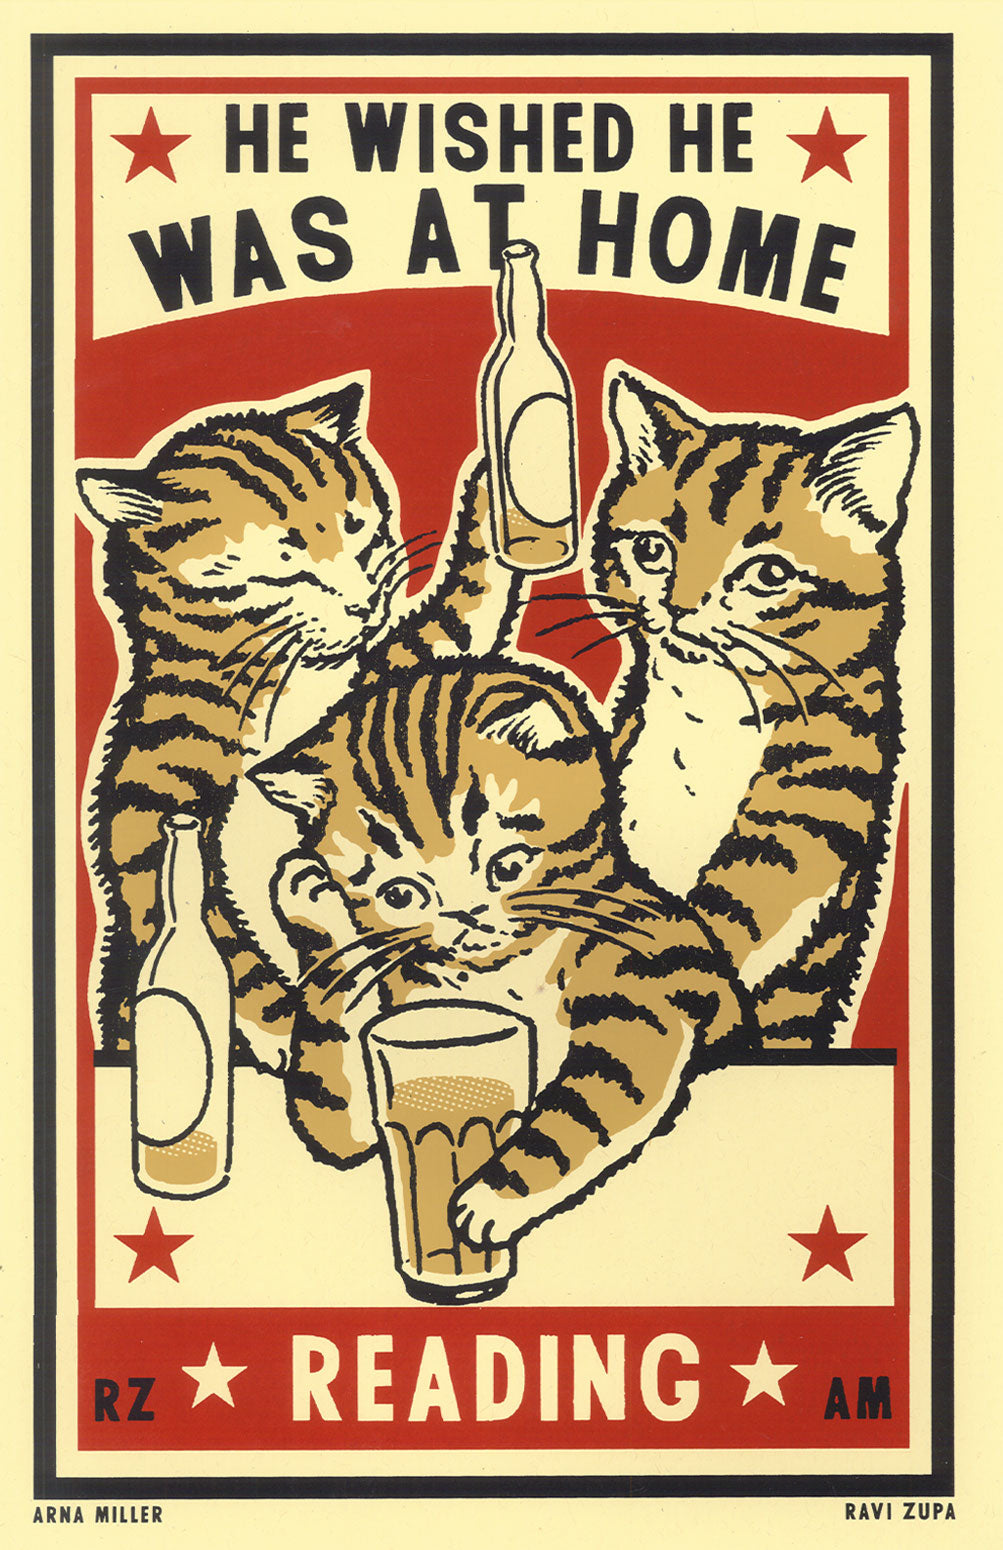 Drunk Cat Series Print - He Wished He Was At Home Reading - By Arna Miller and Ravi Zupa